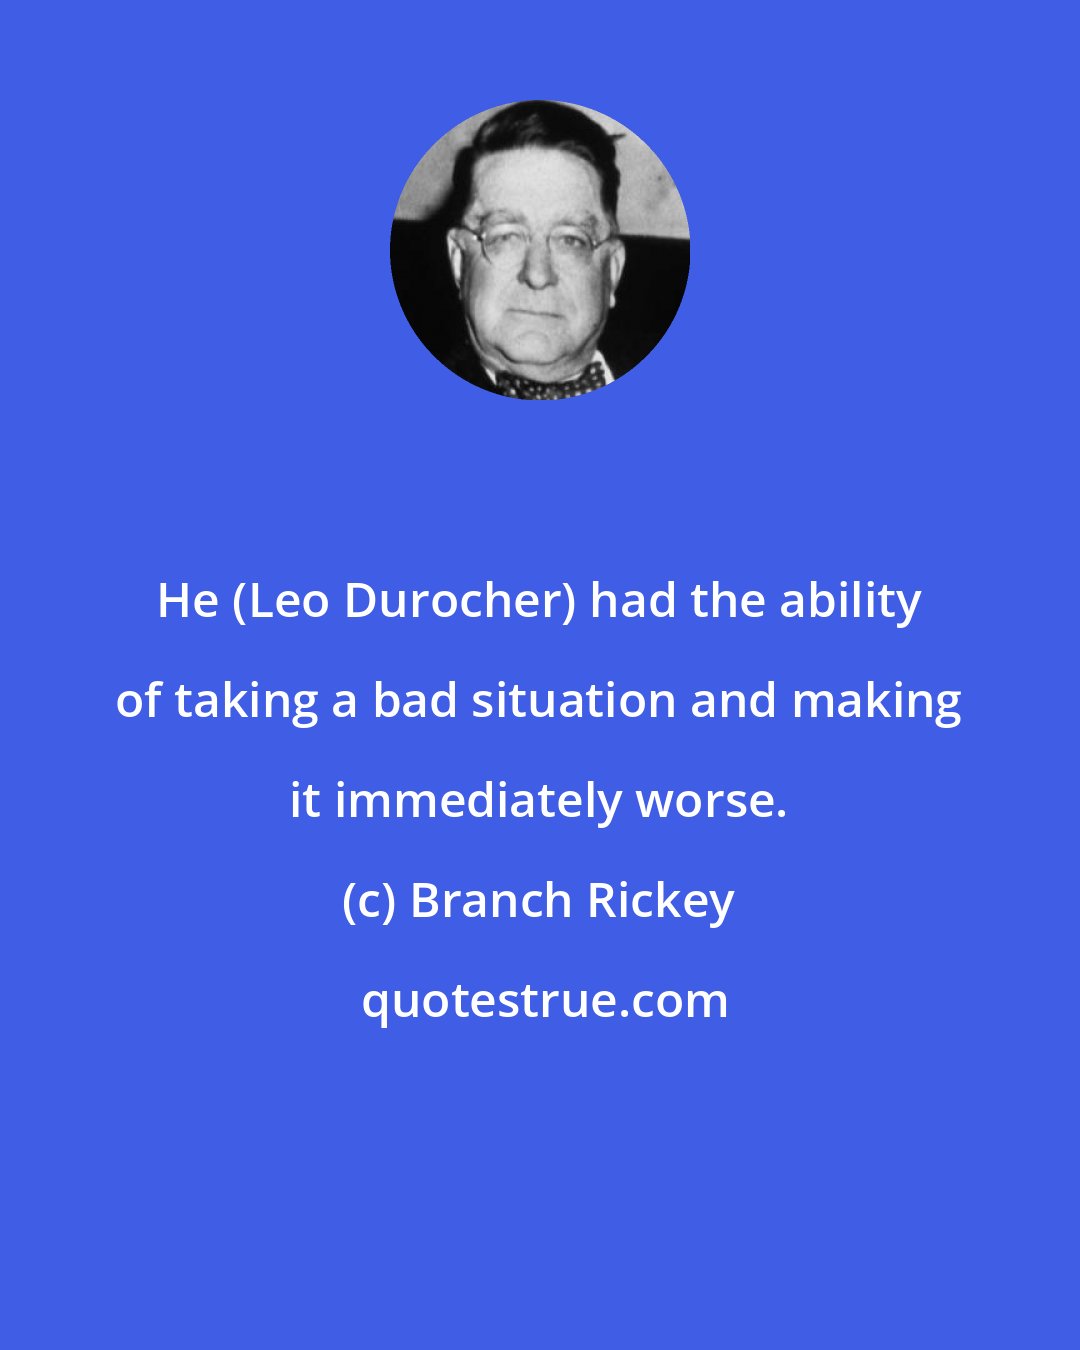 Branch Rickey: He (Leo Durocher) had the ability of taking a bad situation and making it immediately worse.